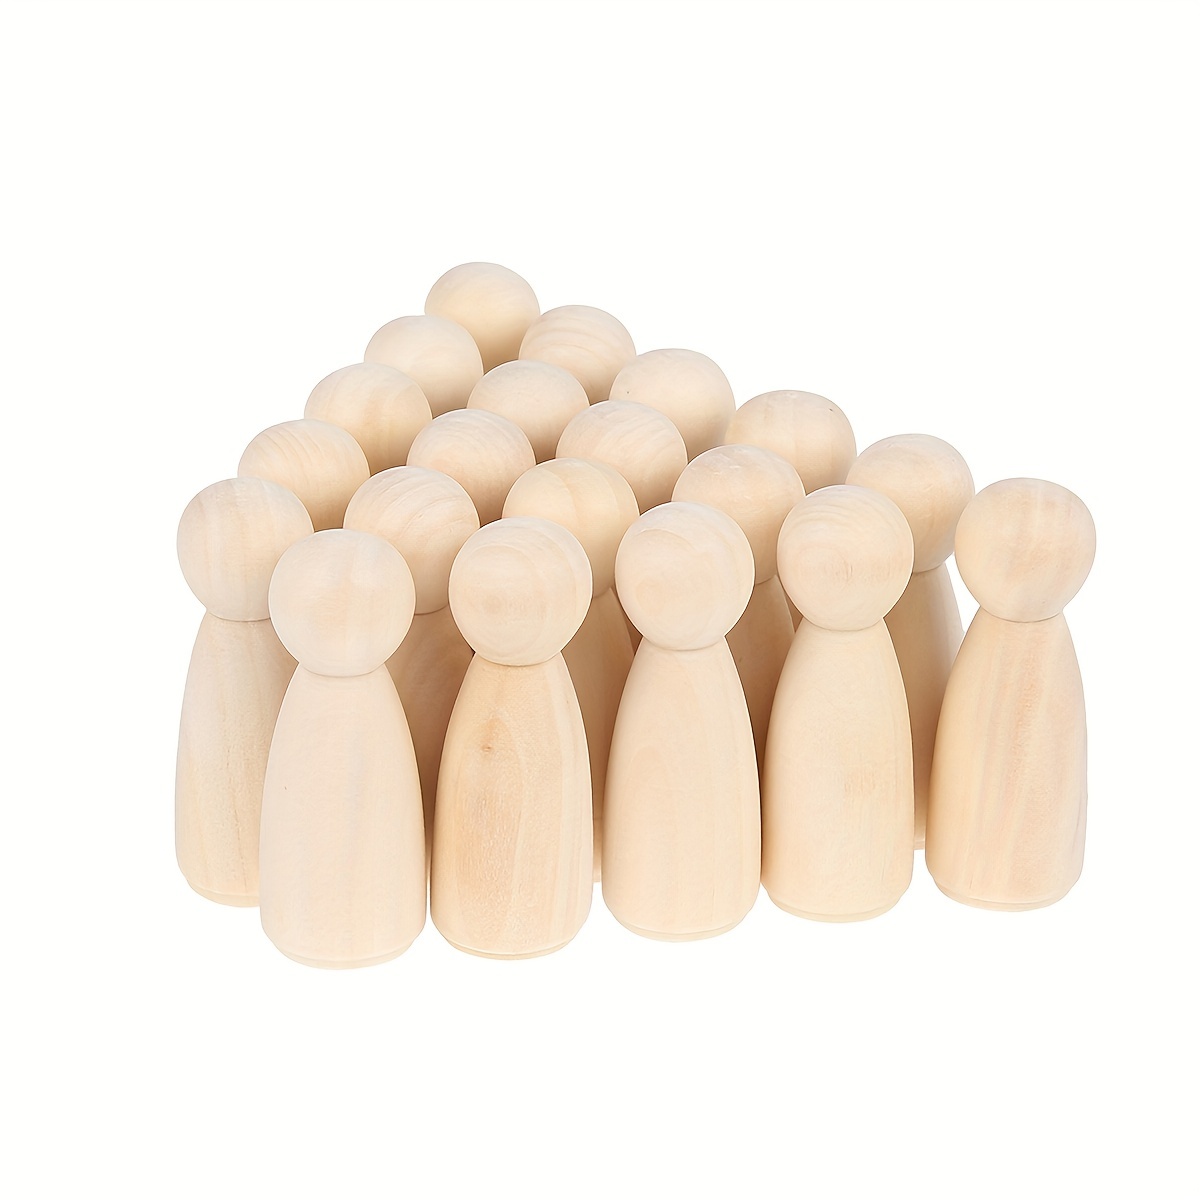 20pcs Painted Wooden Peg Dolls Unfinished Blank DIY Doll People